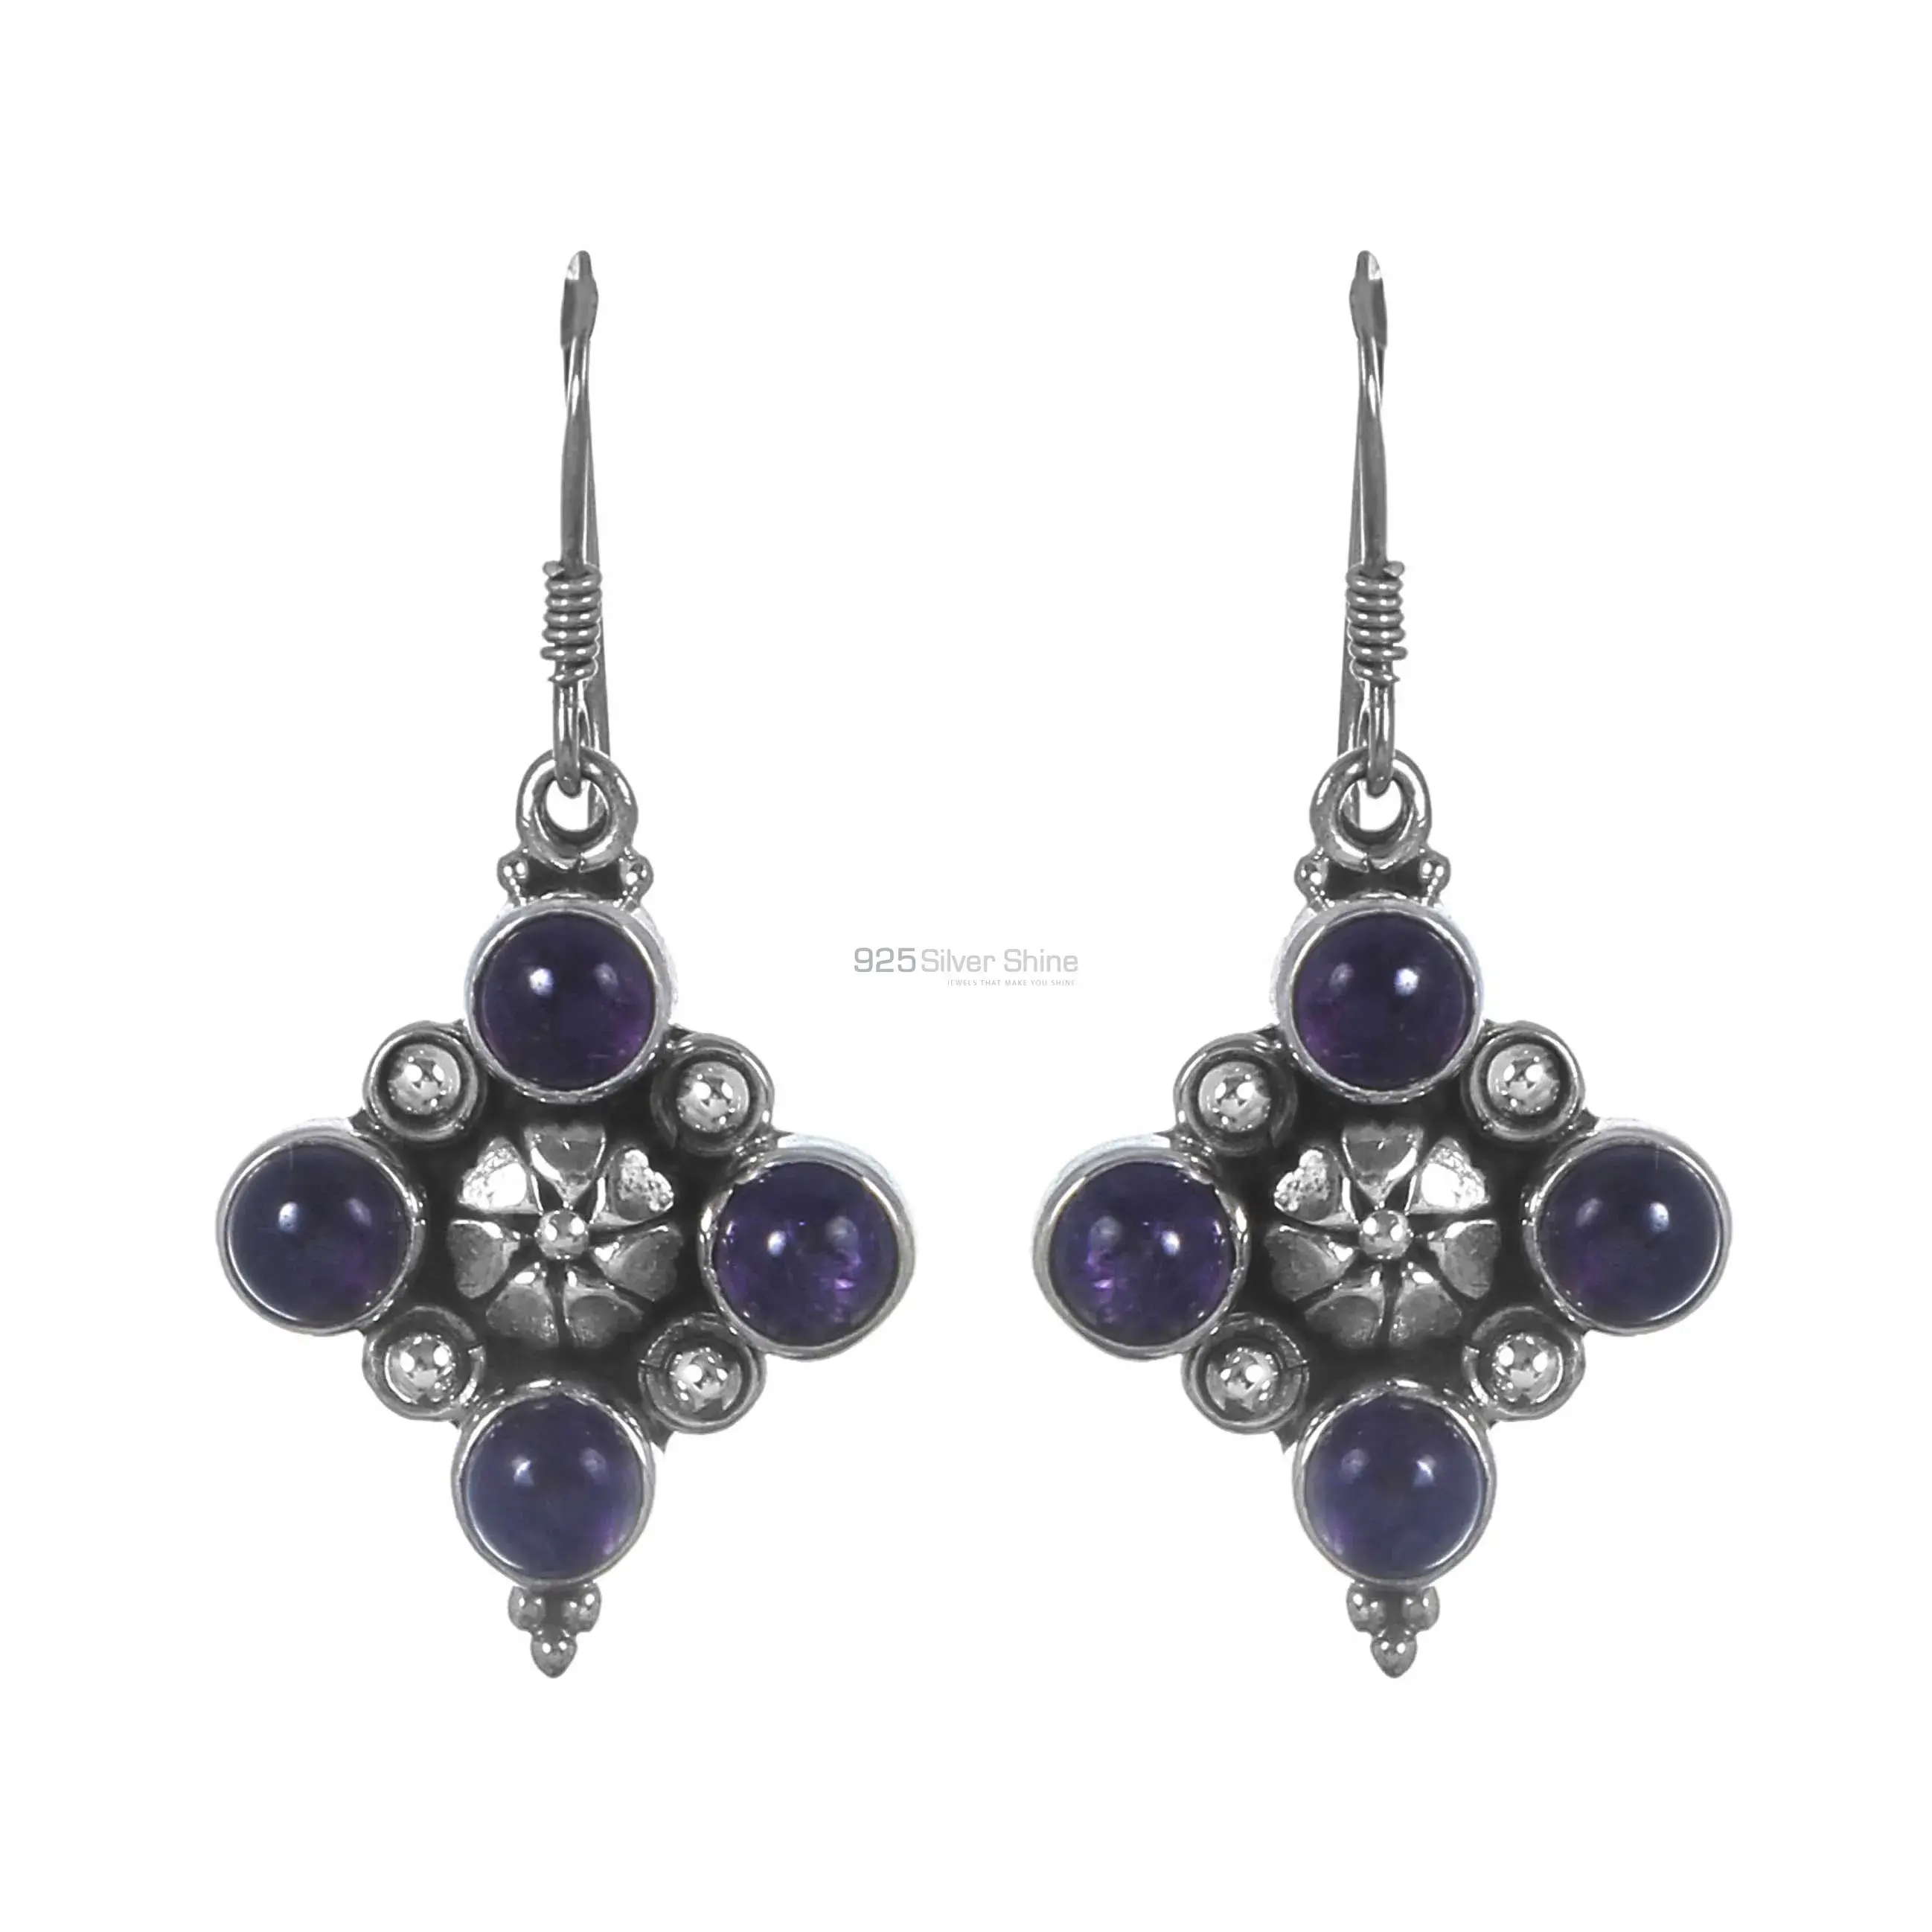 Affordable 925 Sterling Silver Handmade Earrings Suppliers In Lapis Lazuli Gemstone Jewelry 925SE292